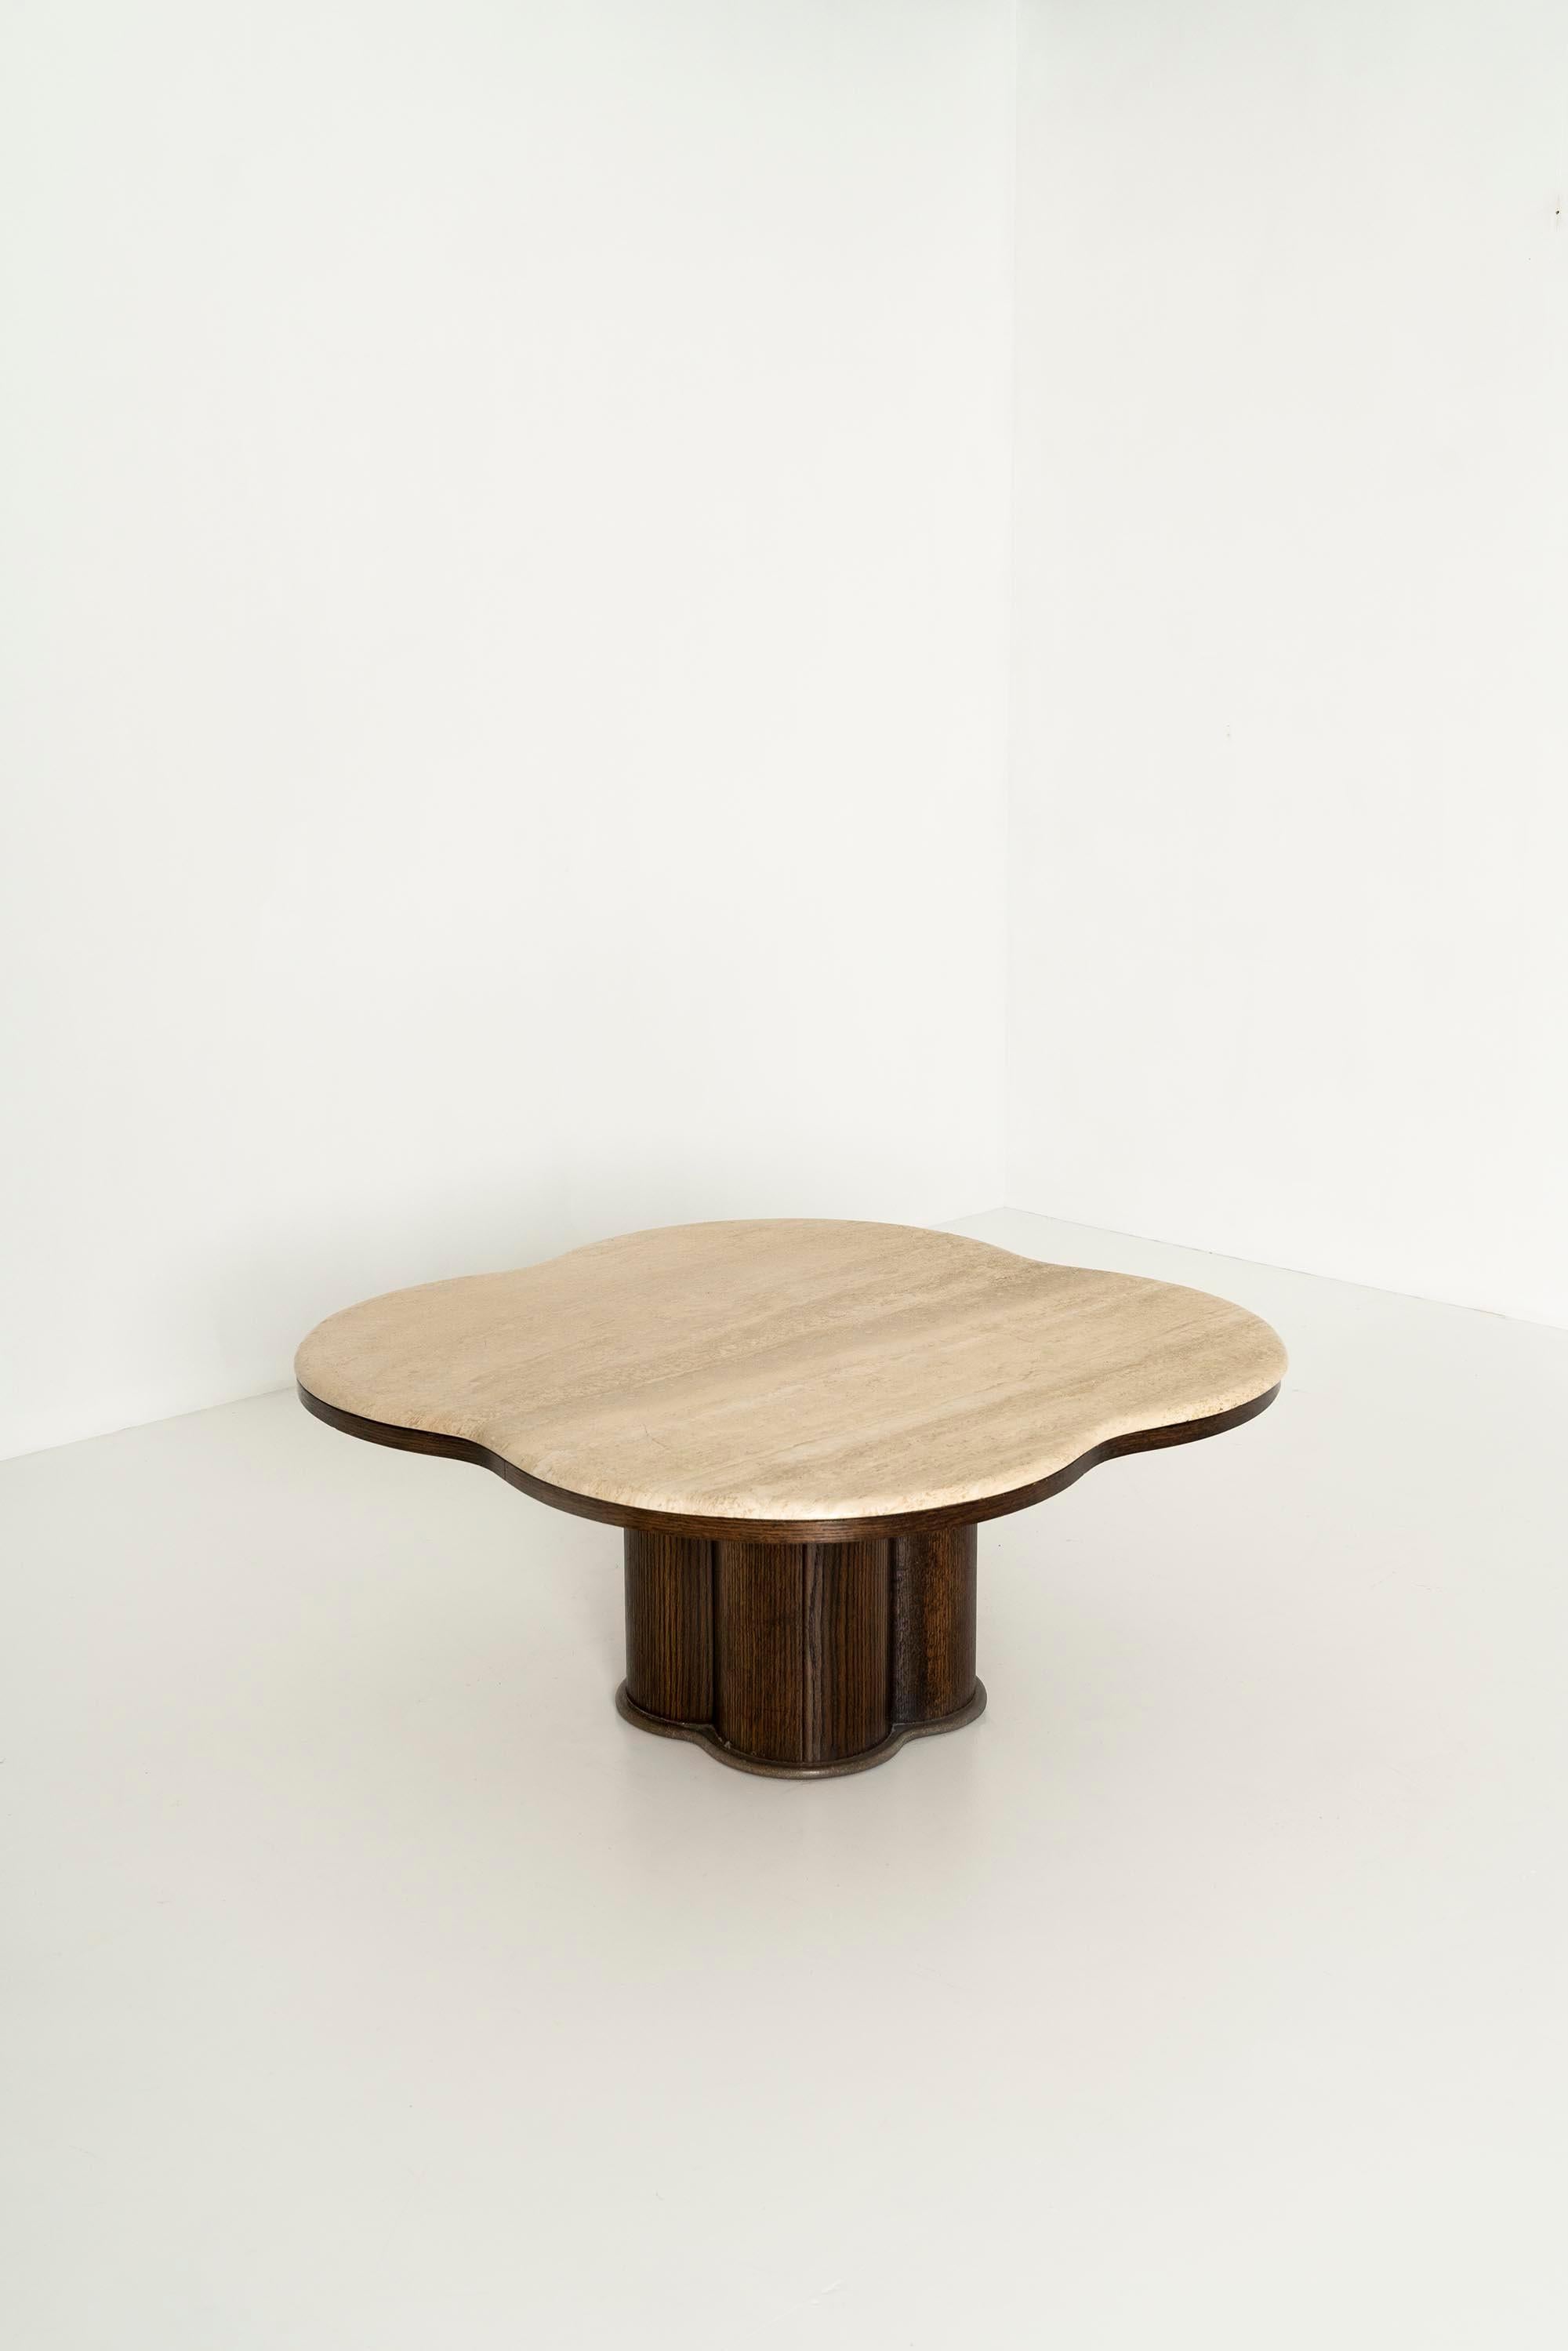 European Travertine Coffee Table in the Style of Jean Royère Style, 1970s